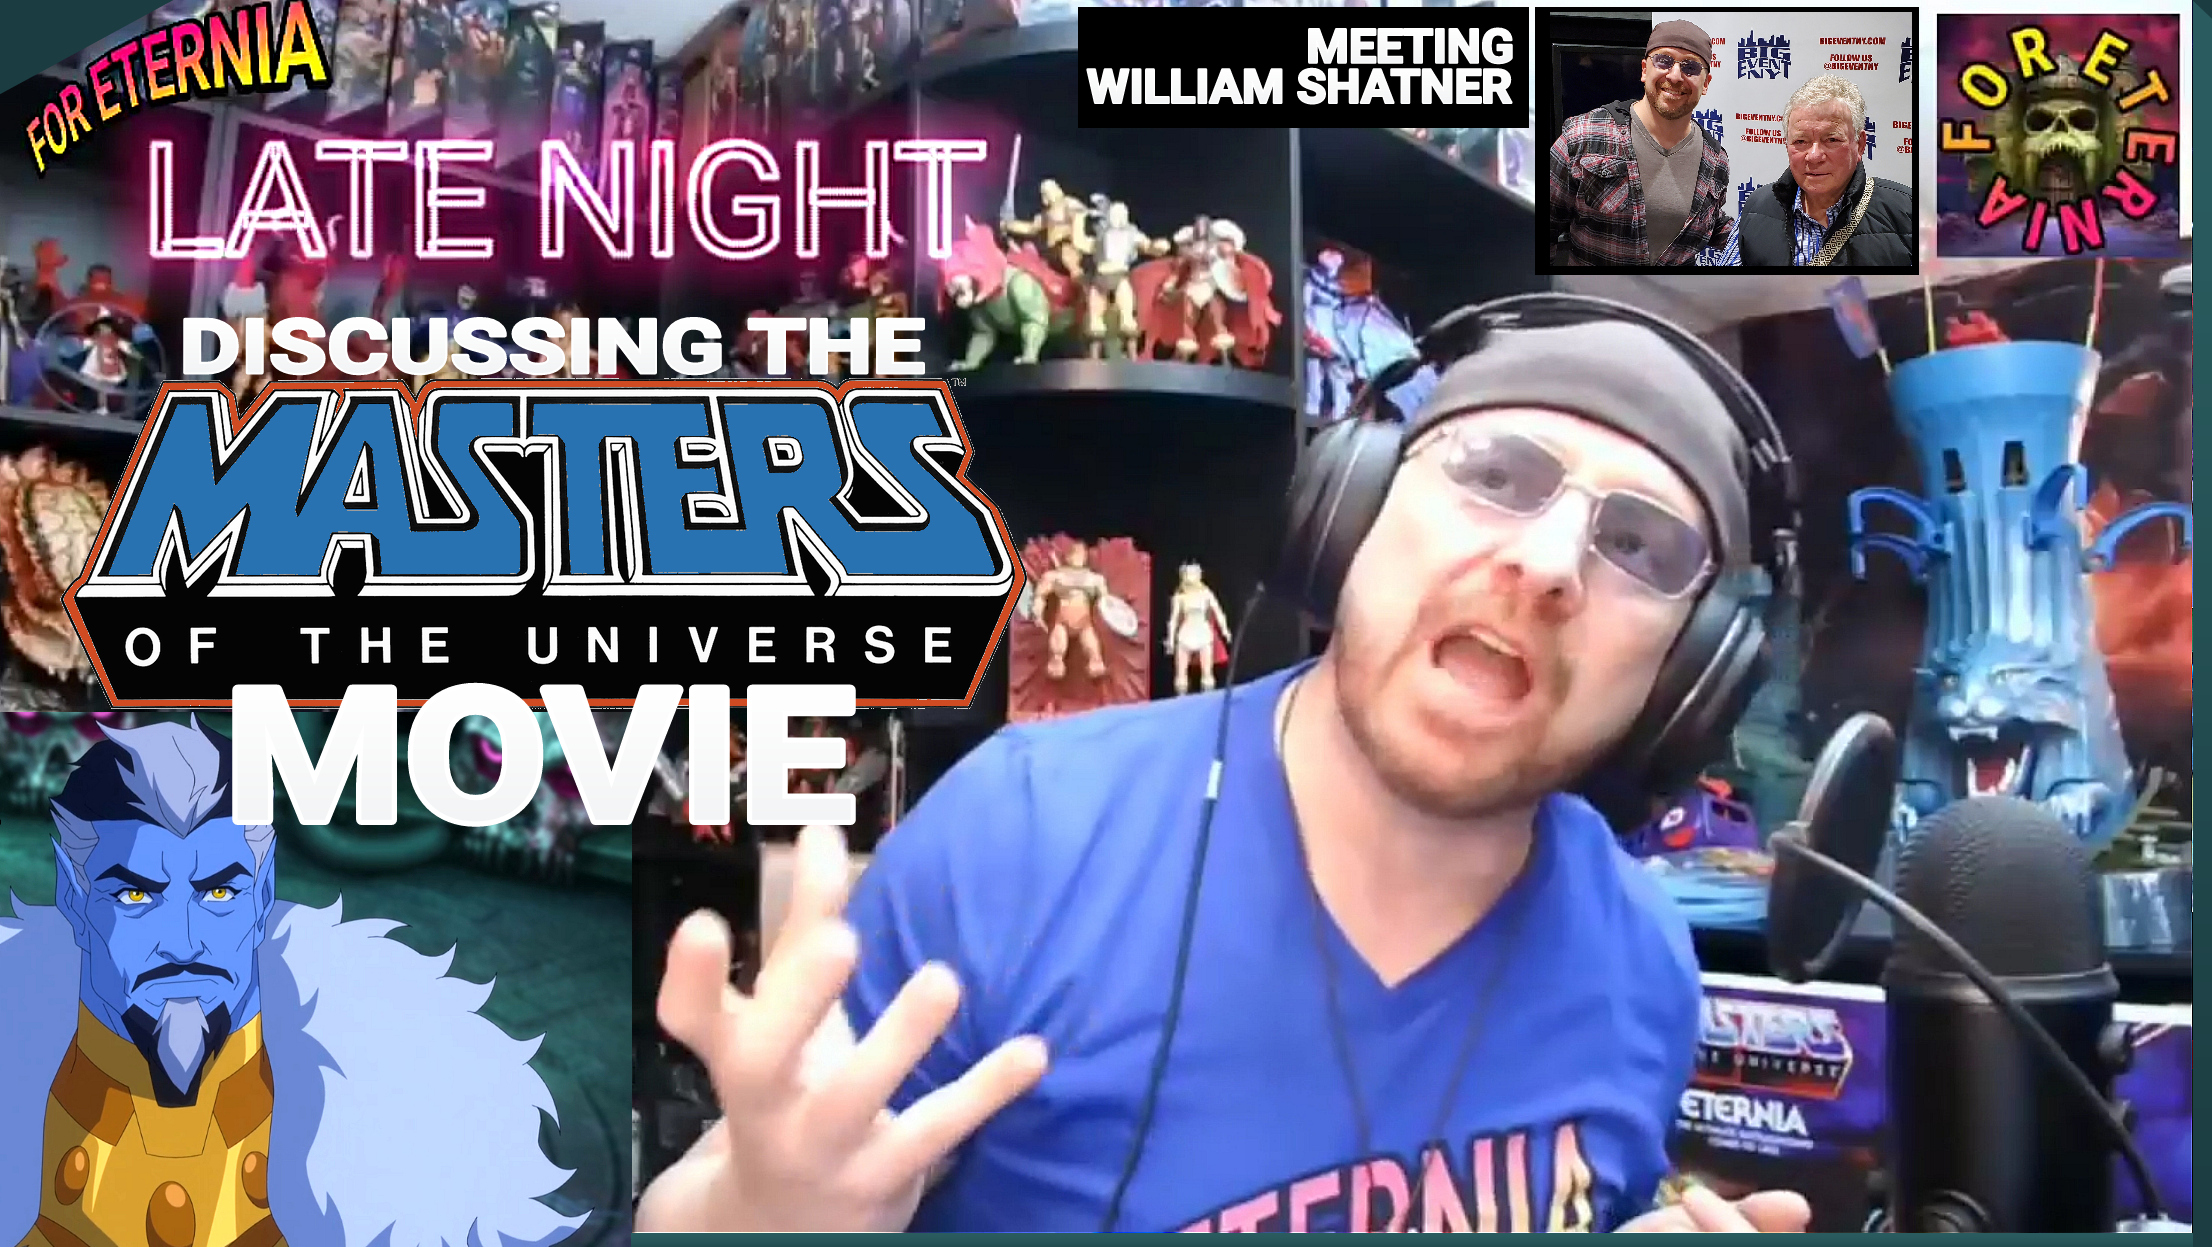 FOR ETERNIA LATE NIGHT! Discussing the New Masters of the Universe MOVIE, meeting William Shatner and More!